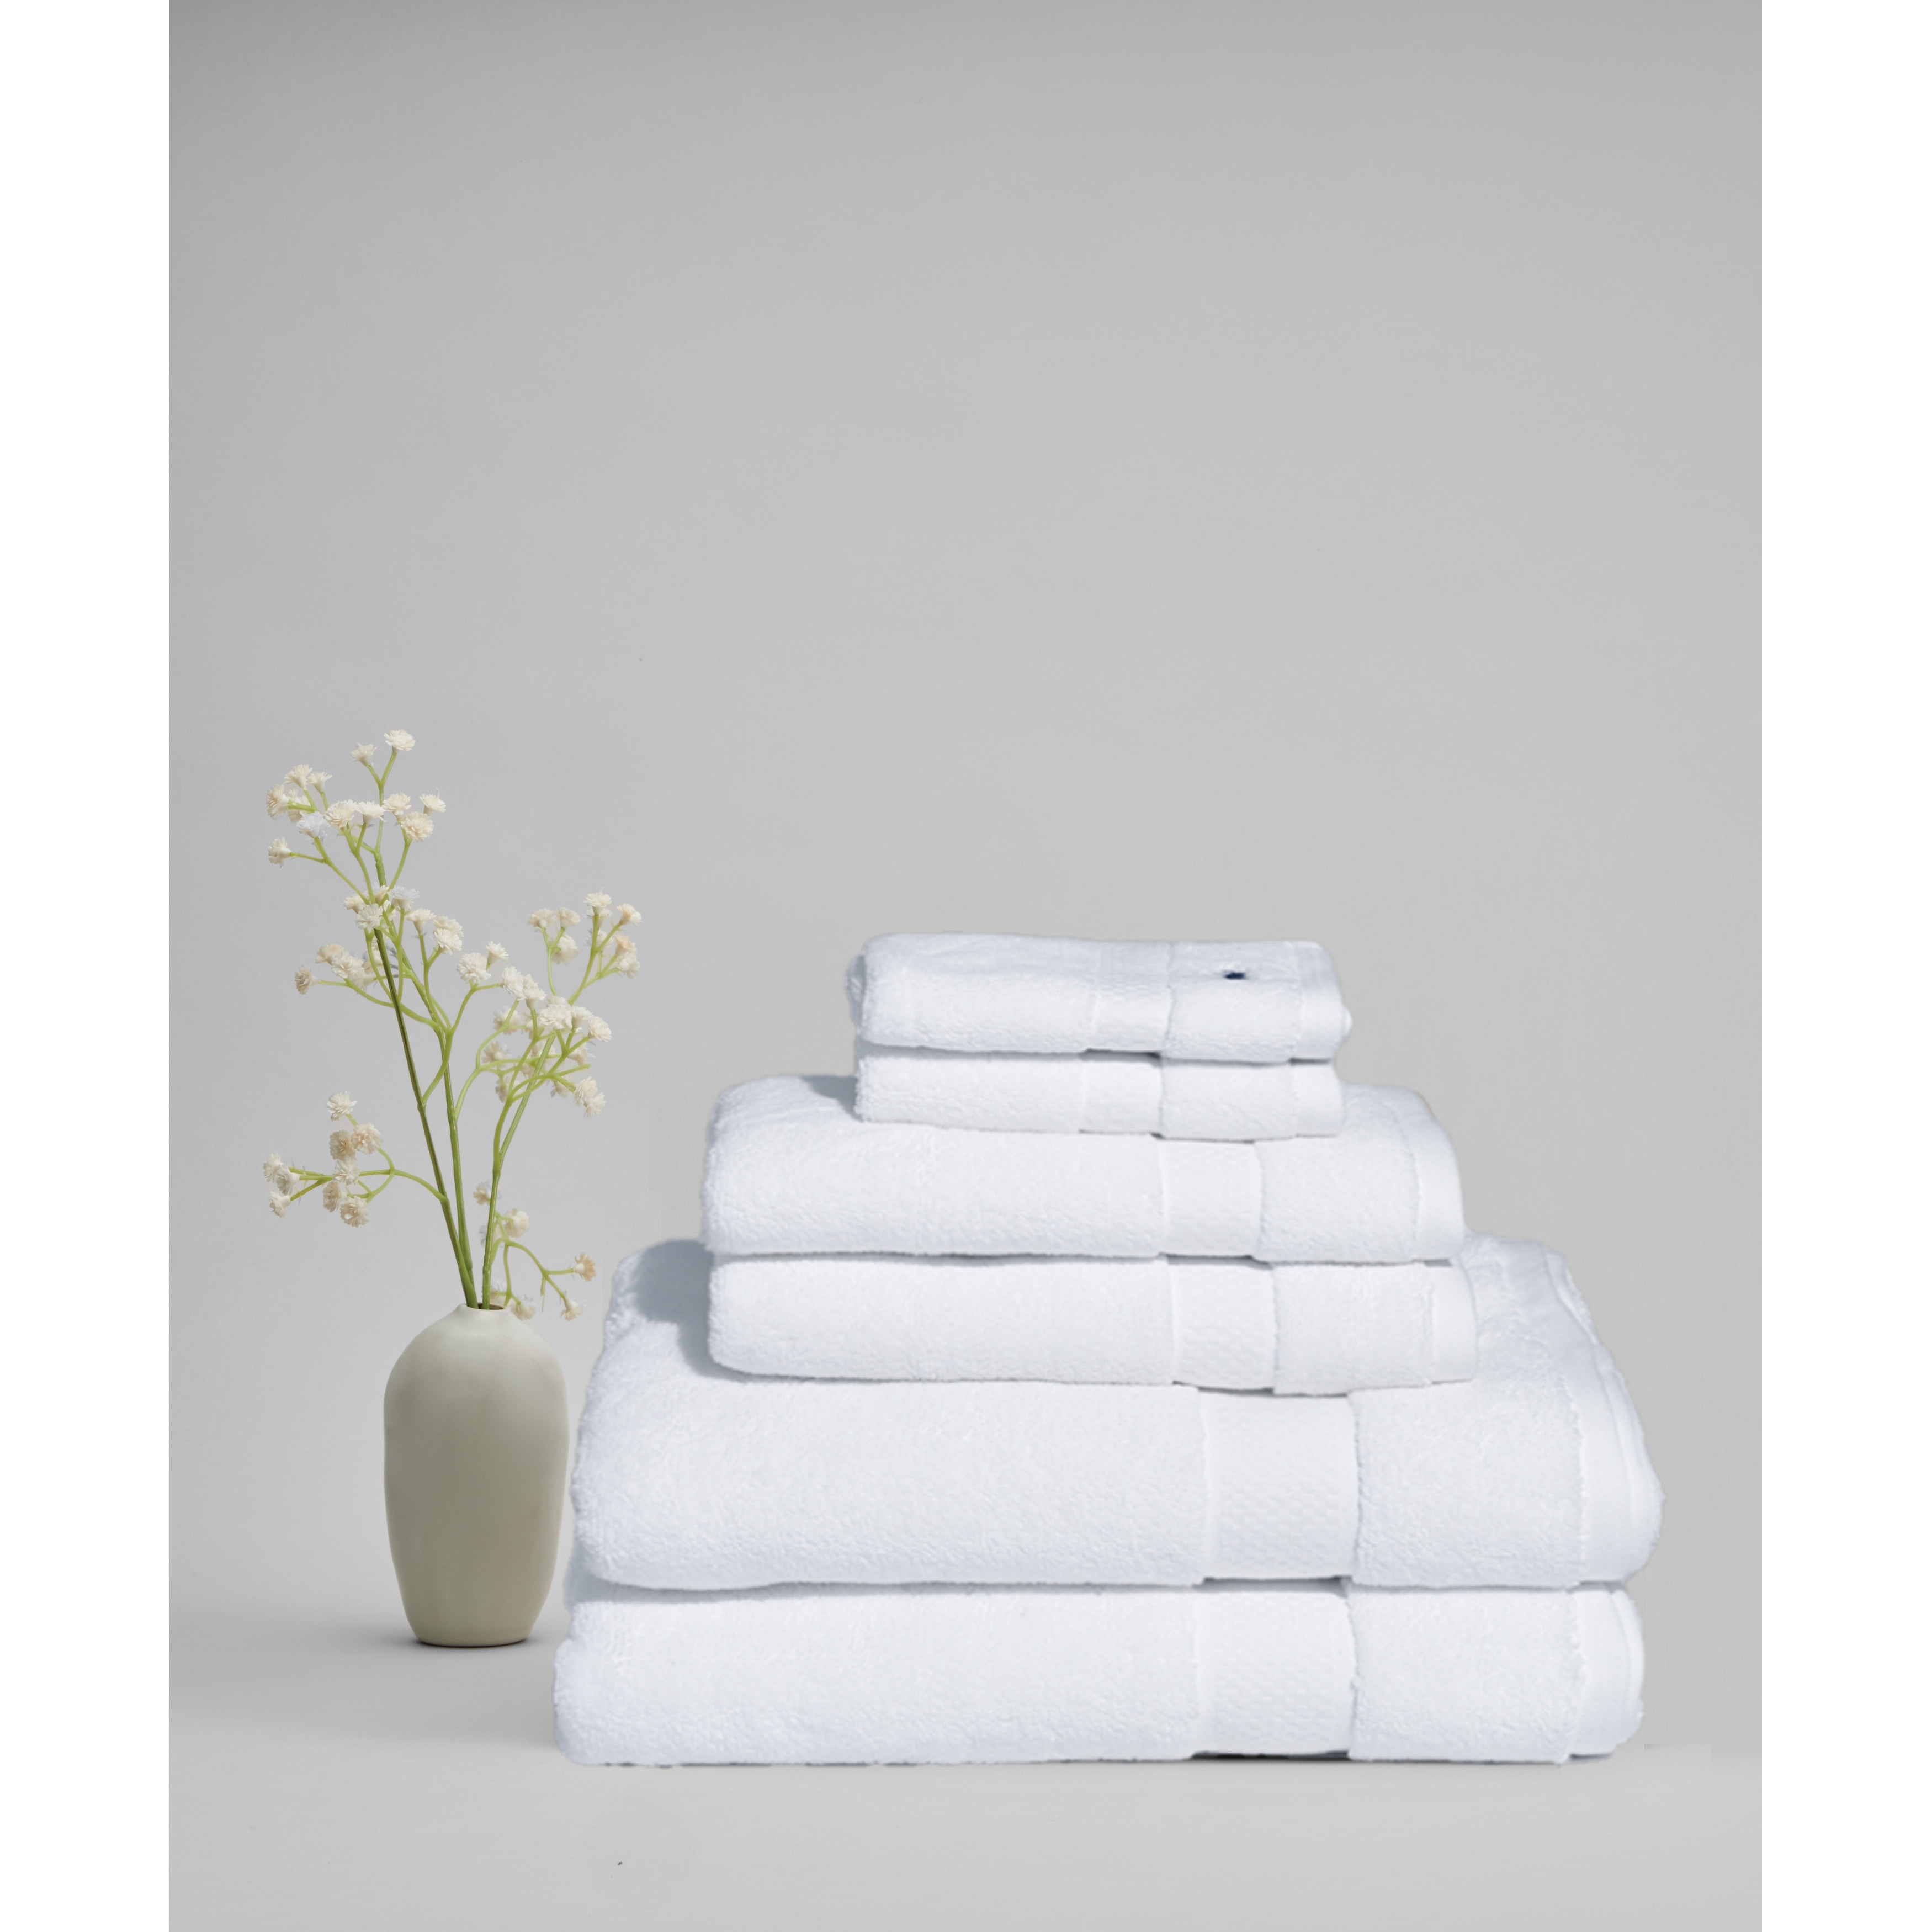 https://ak1.ostkcdn.com/images/products/is/images/direct/5e53b3d05f51d07cb1d6d3b36a3796570b46776a/Royal-Velvet-Signature-Solid-6-Piece-Towel-Set.jpg